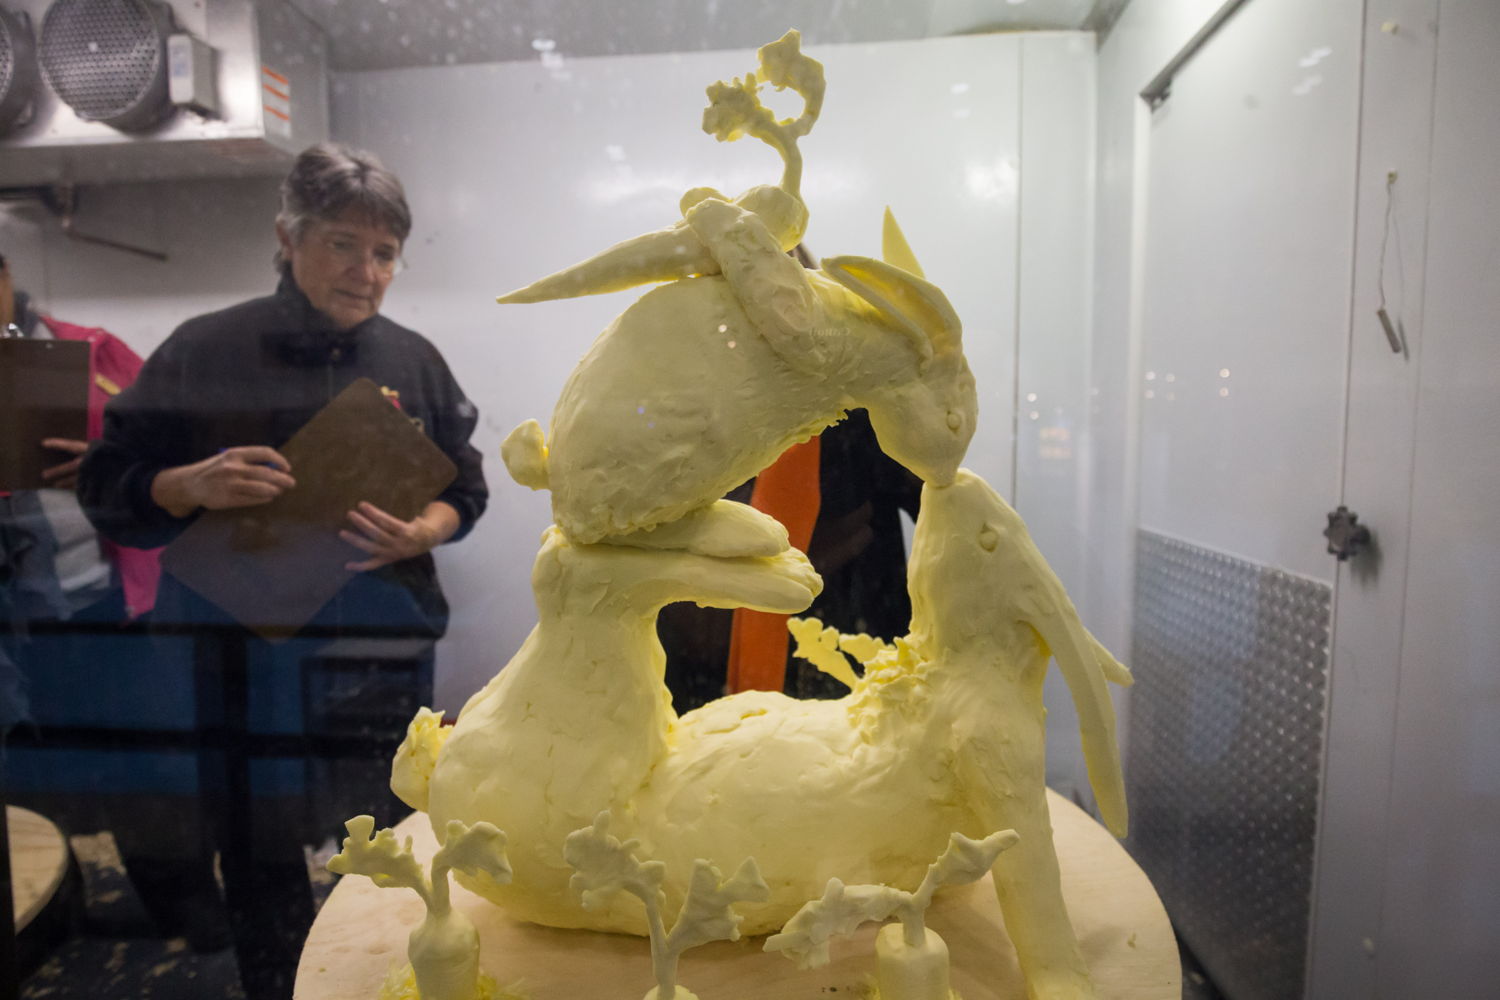 Don't miss the 2020 Virtual Butter Sculpting Competition! Details to come.